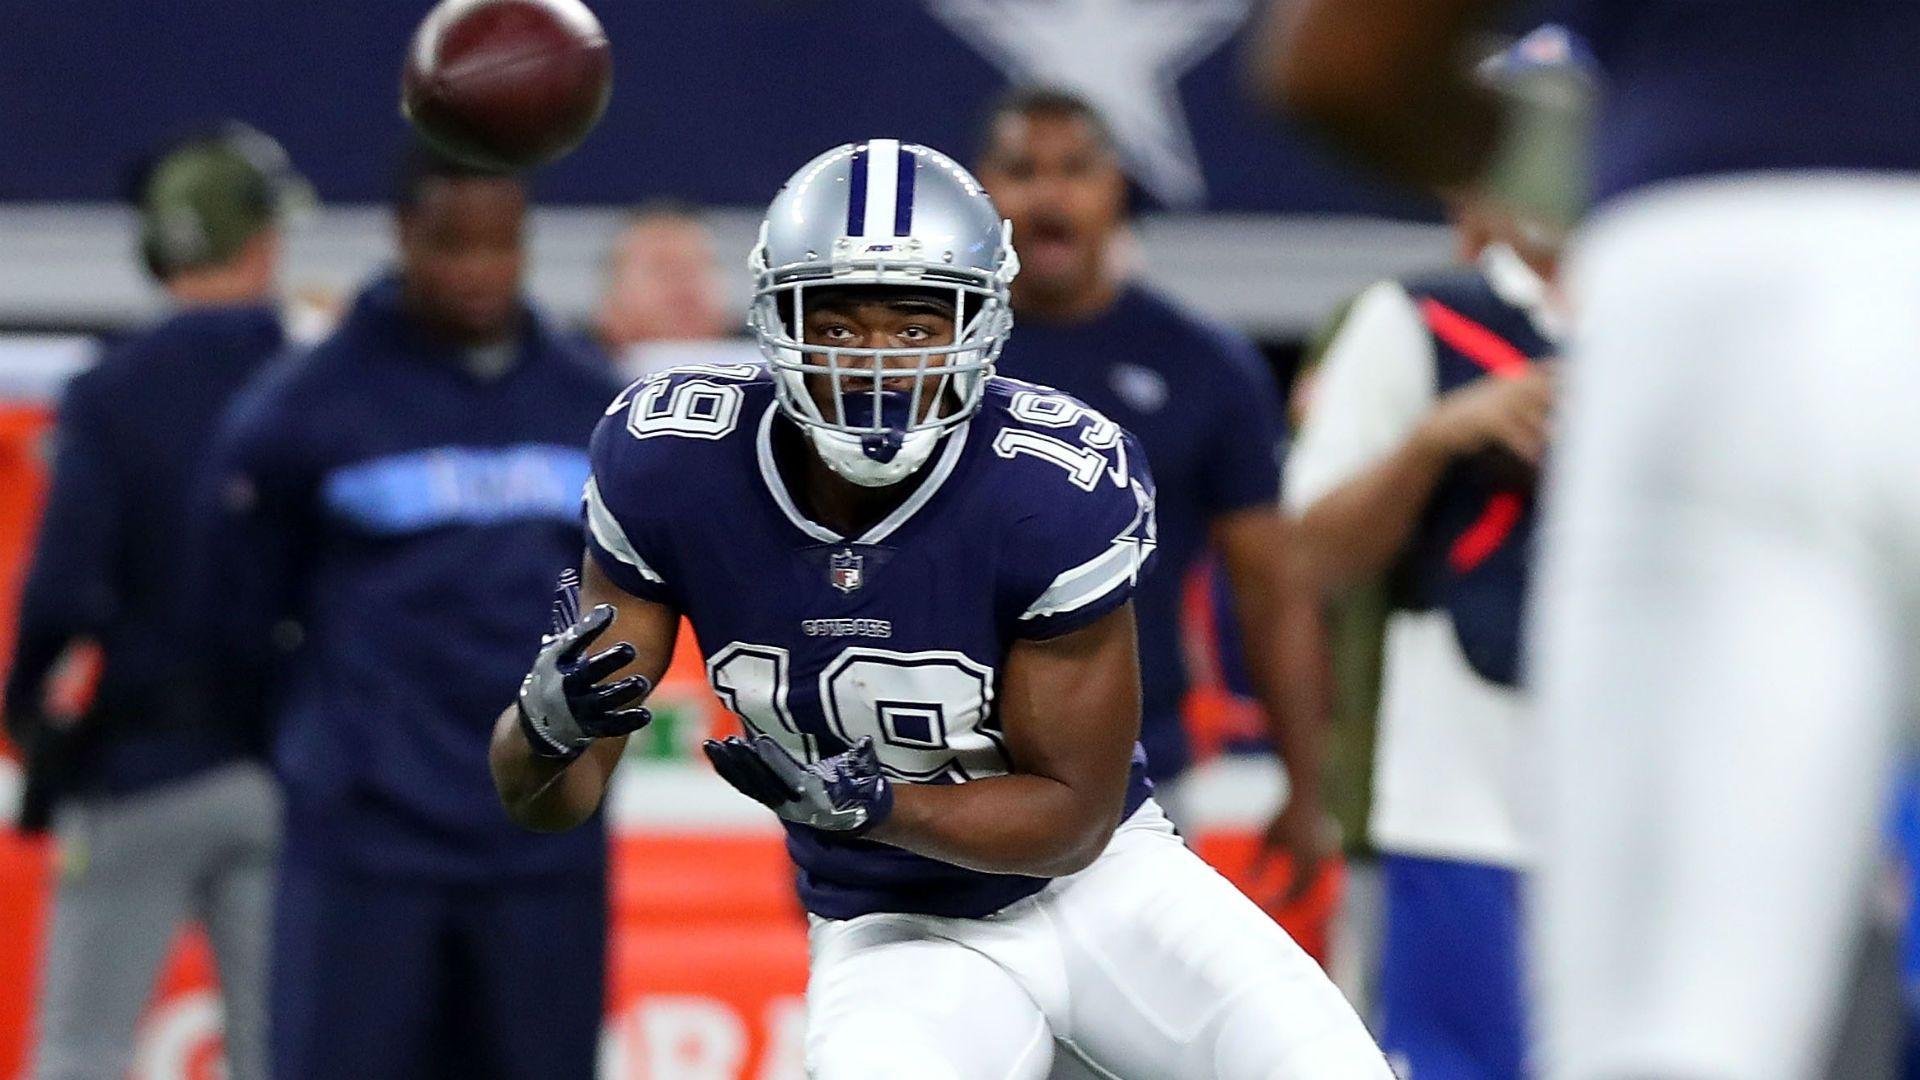 Cowboys WR Amari Cooper says he has more passion in Dallas. NFL